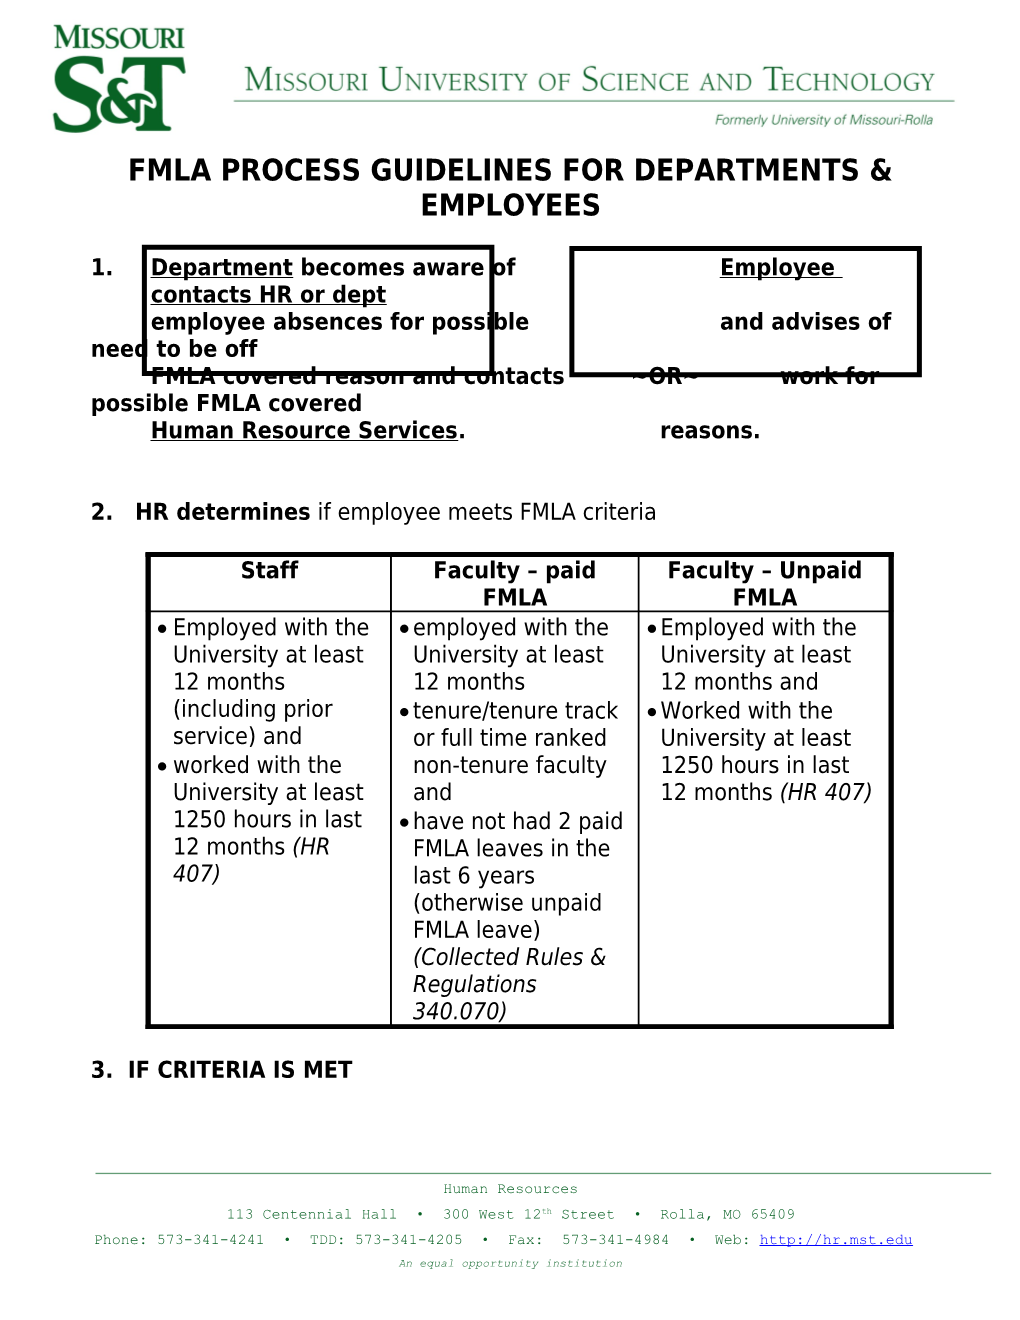 Fmla Process Guidelines for Departments & Employees